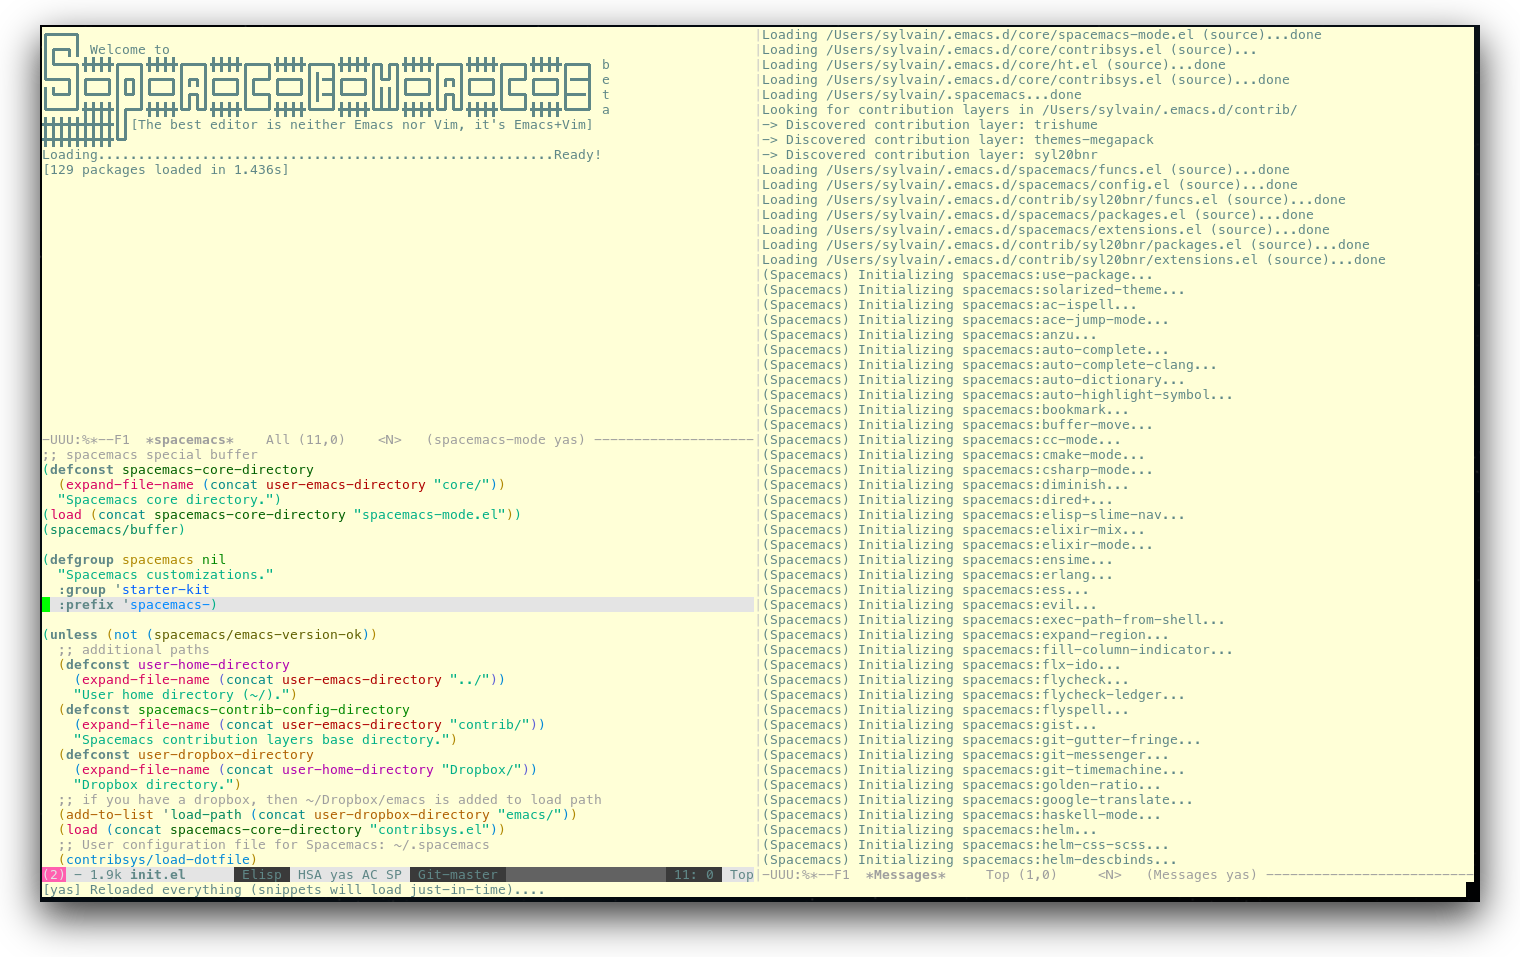 /TakeV/spacemacs/media/commit/9c7c14814102440a82af0029086c487f1053469a/doc/img/spacemacs-urxvt.png